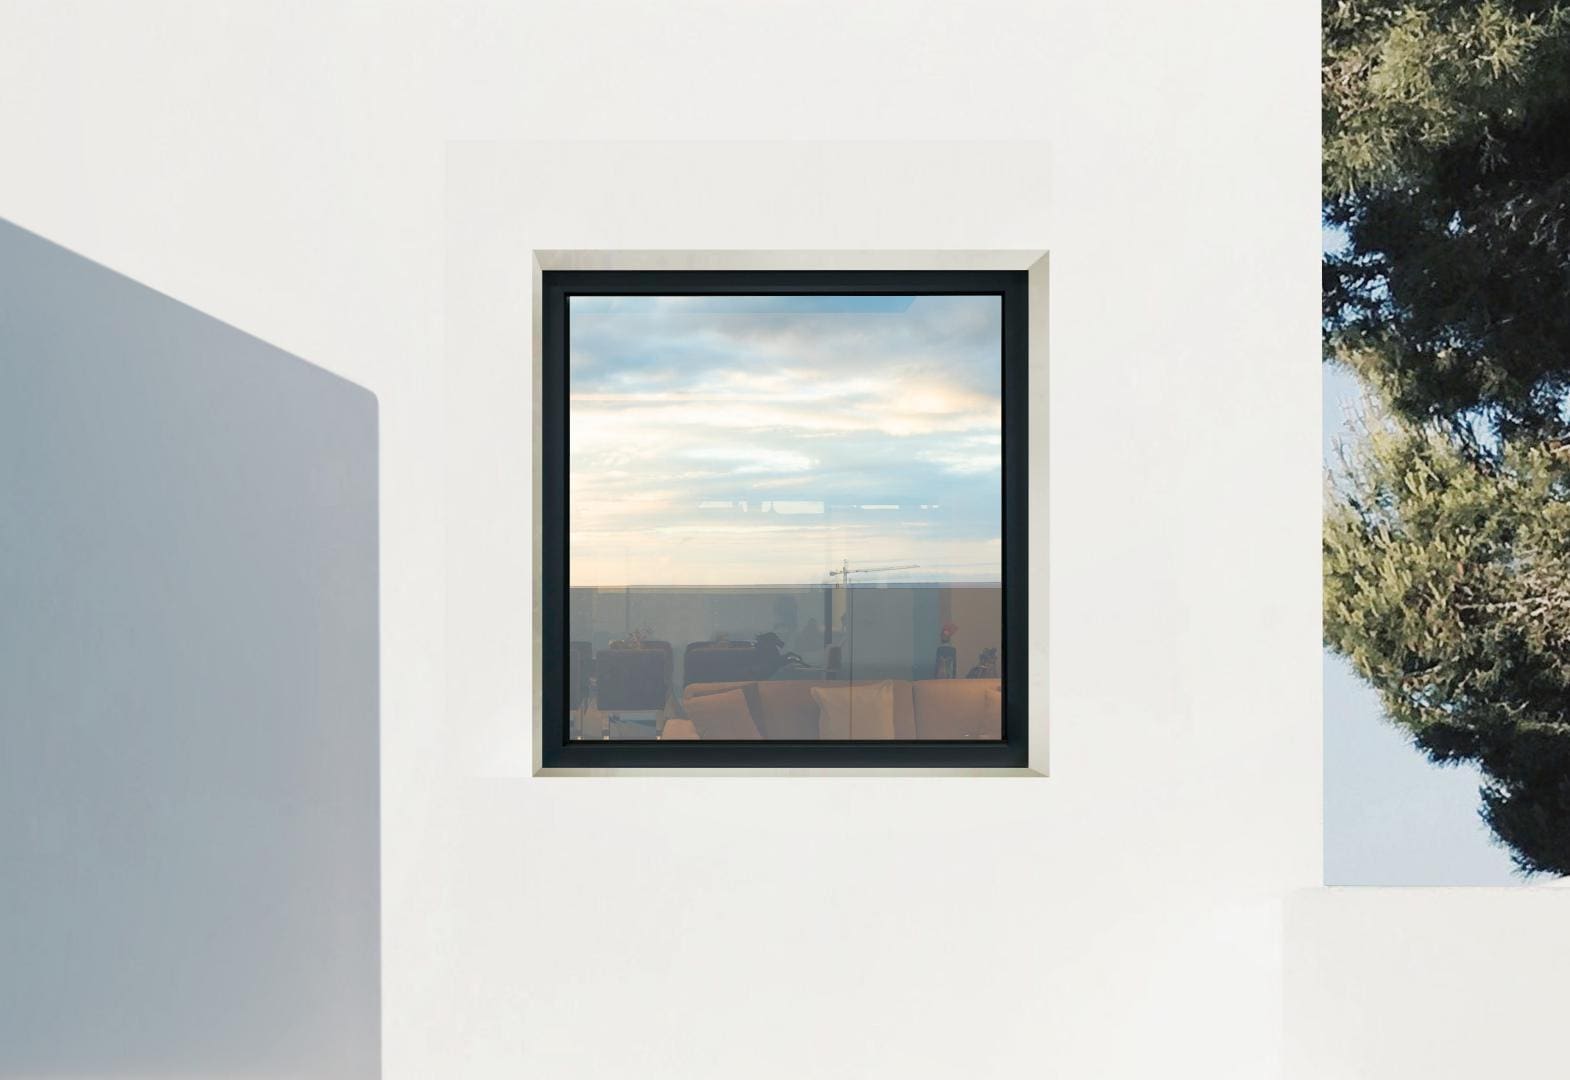 Window in a white wall with black frameowrk and a view overlooking a landscape.